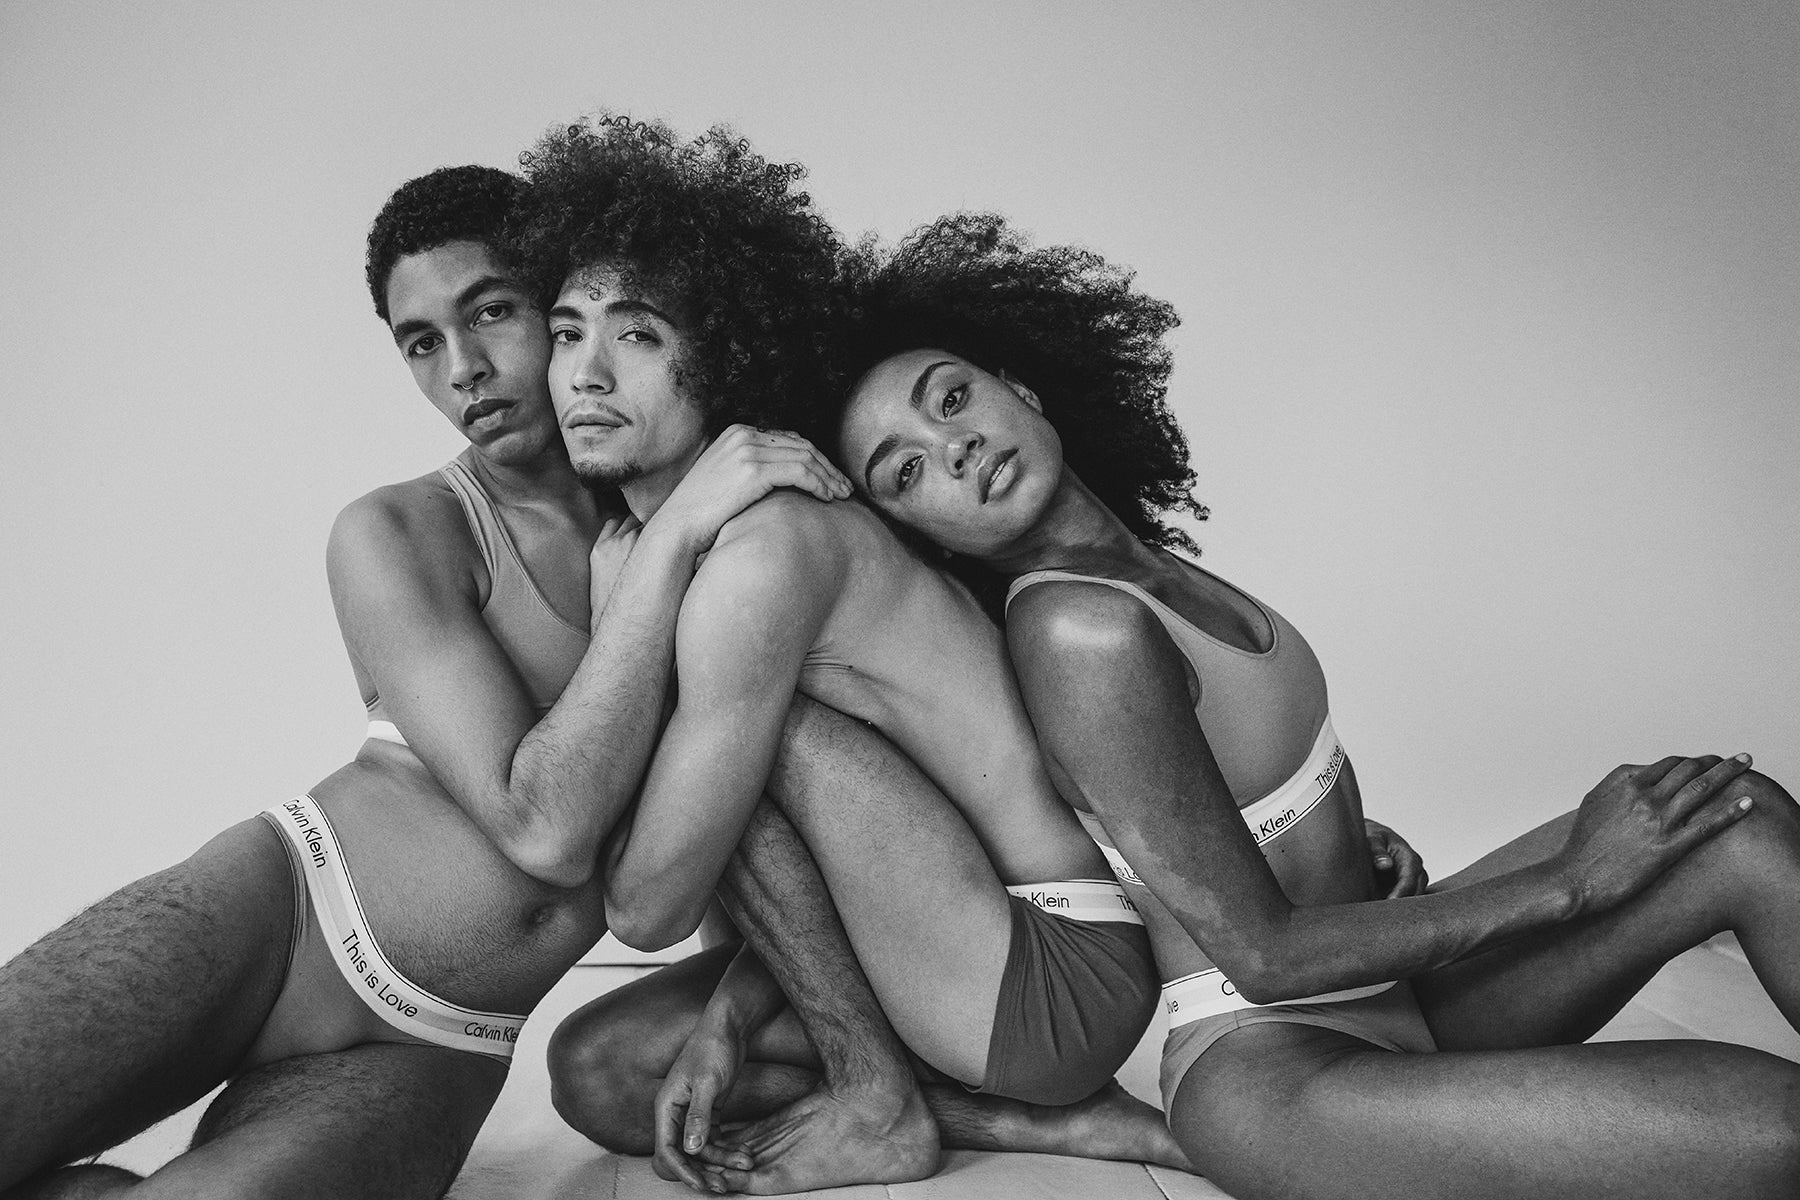 Calvin Klein Celebrates Pride With Vibrant Members Of The Queer Community